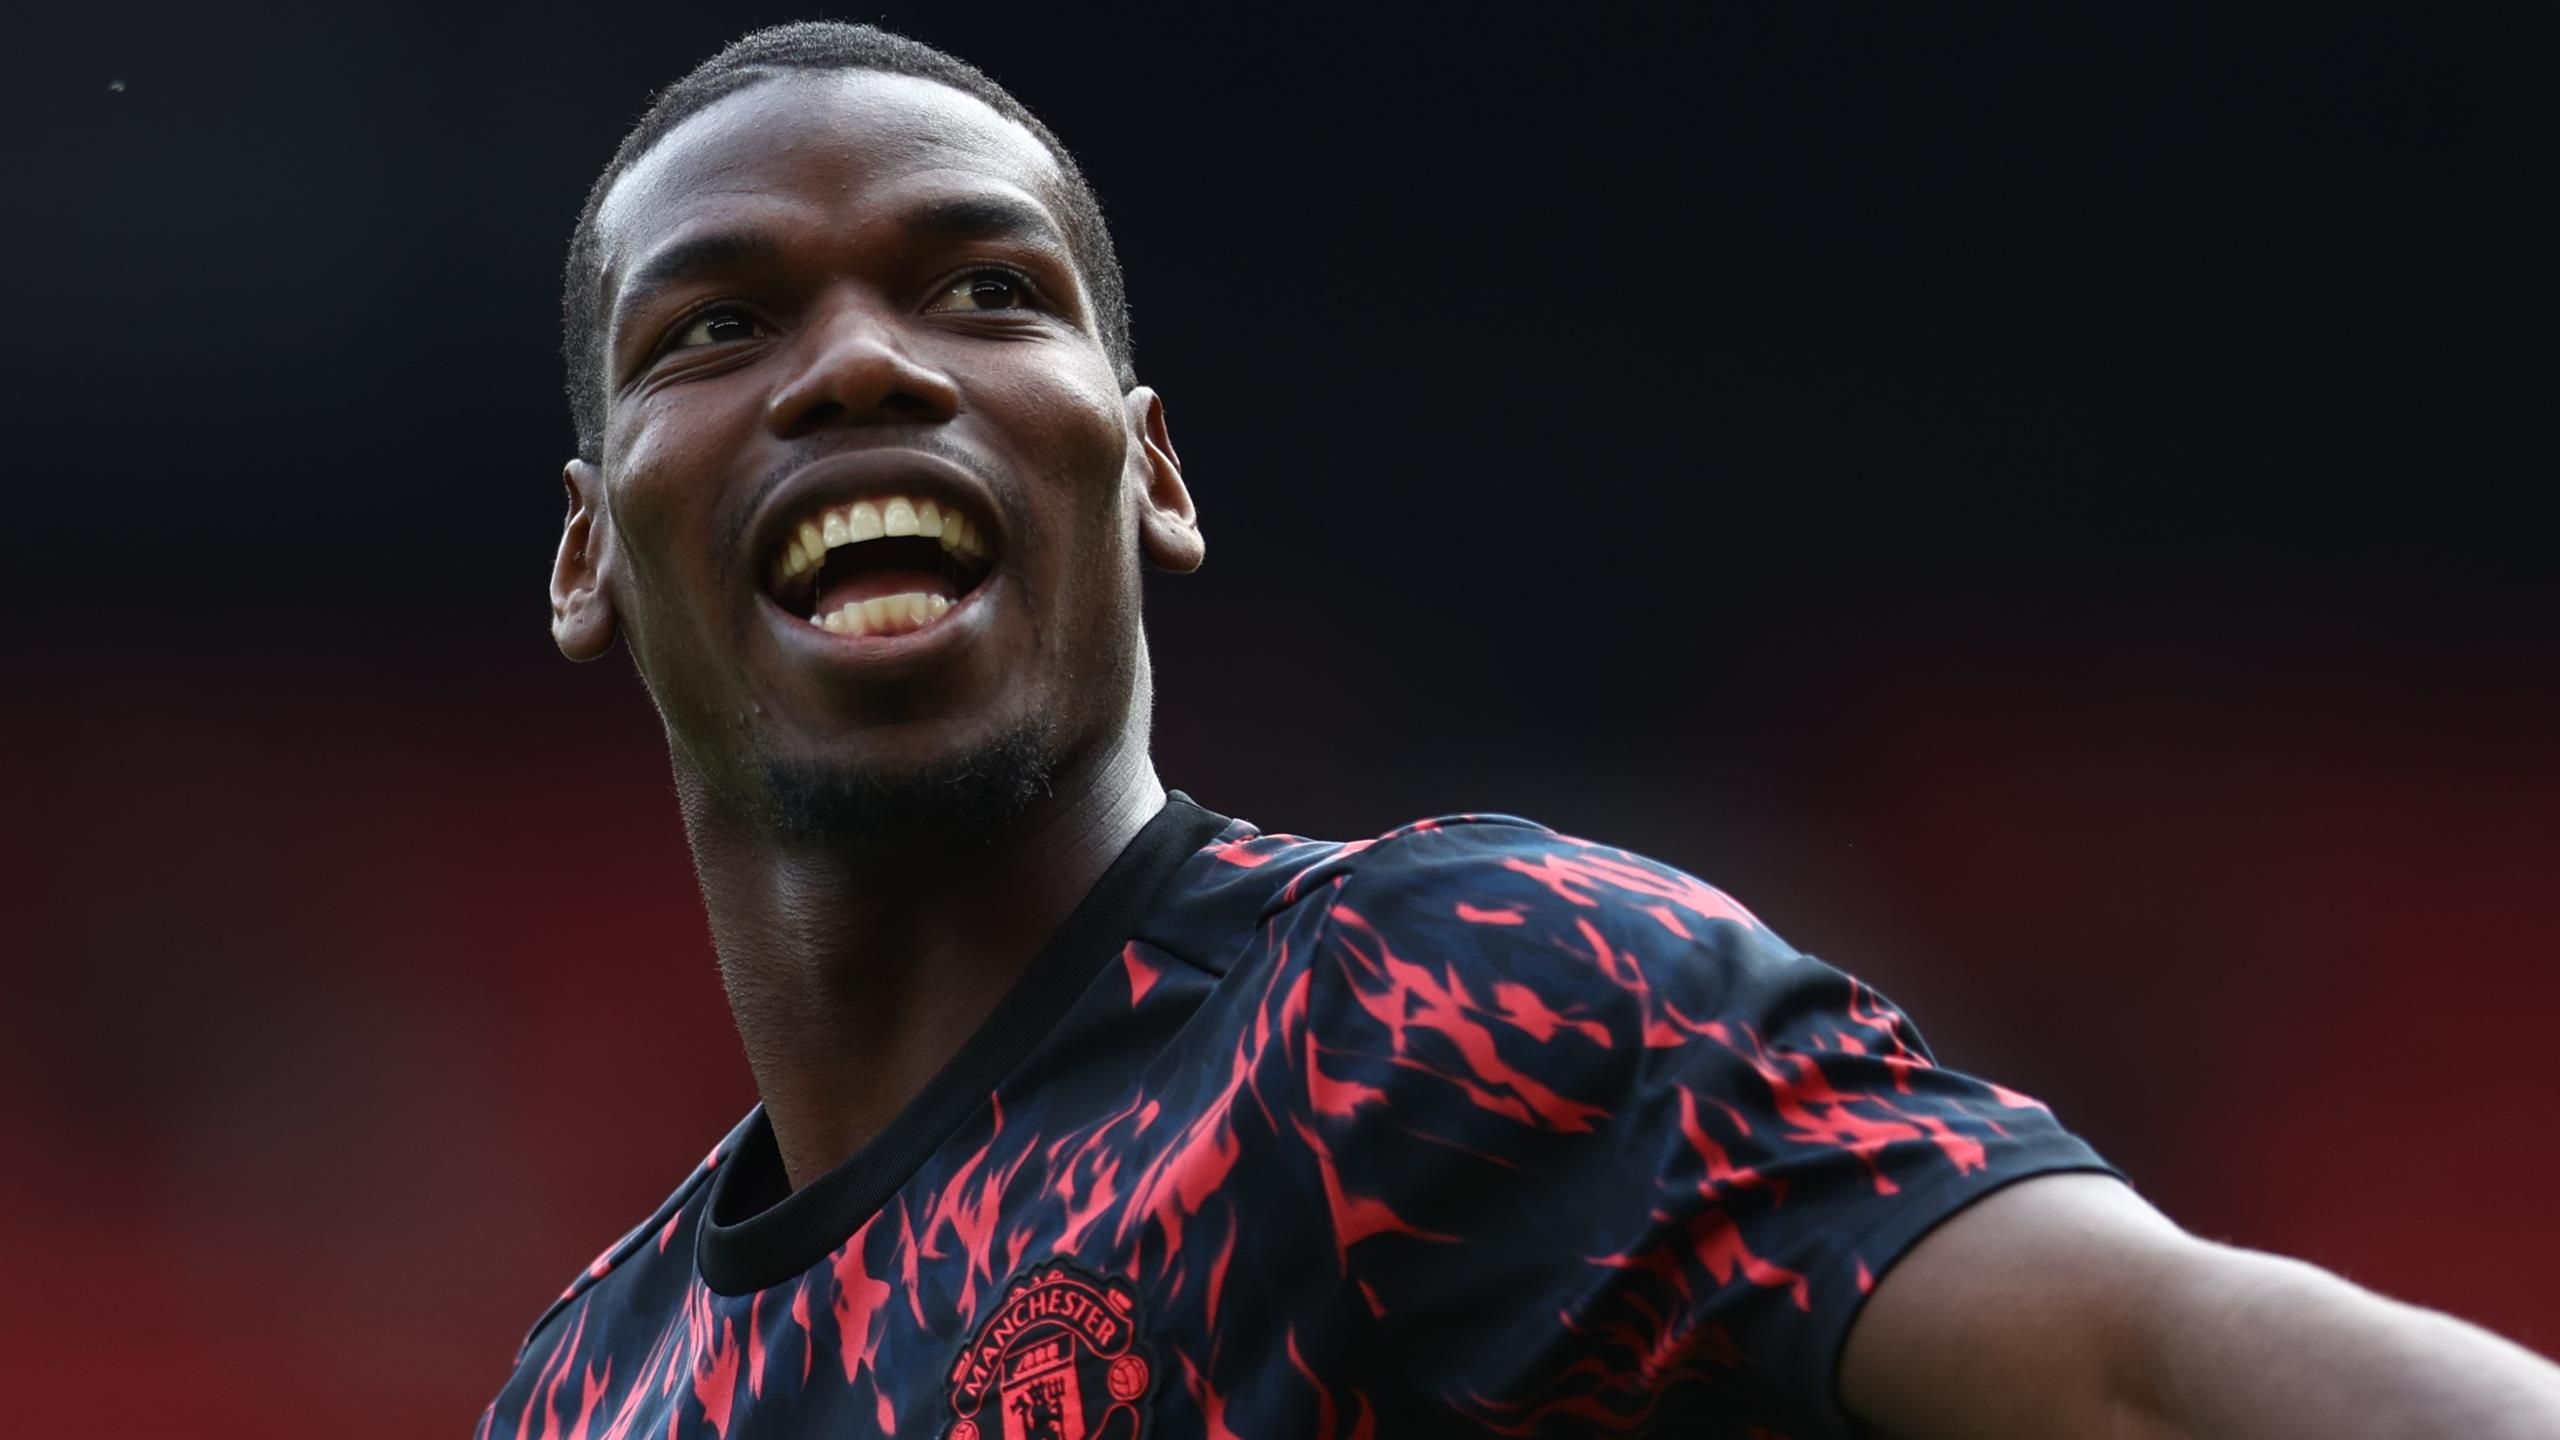 Paul Pogba agrees to join Juventus: Manchester United midfielder signs  four-year contract with Serie A giants – reports